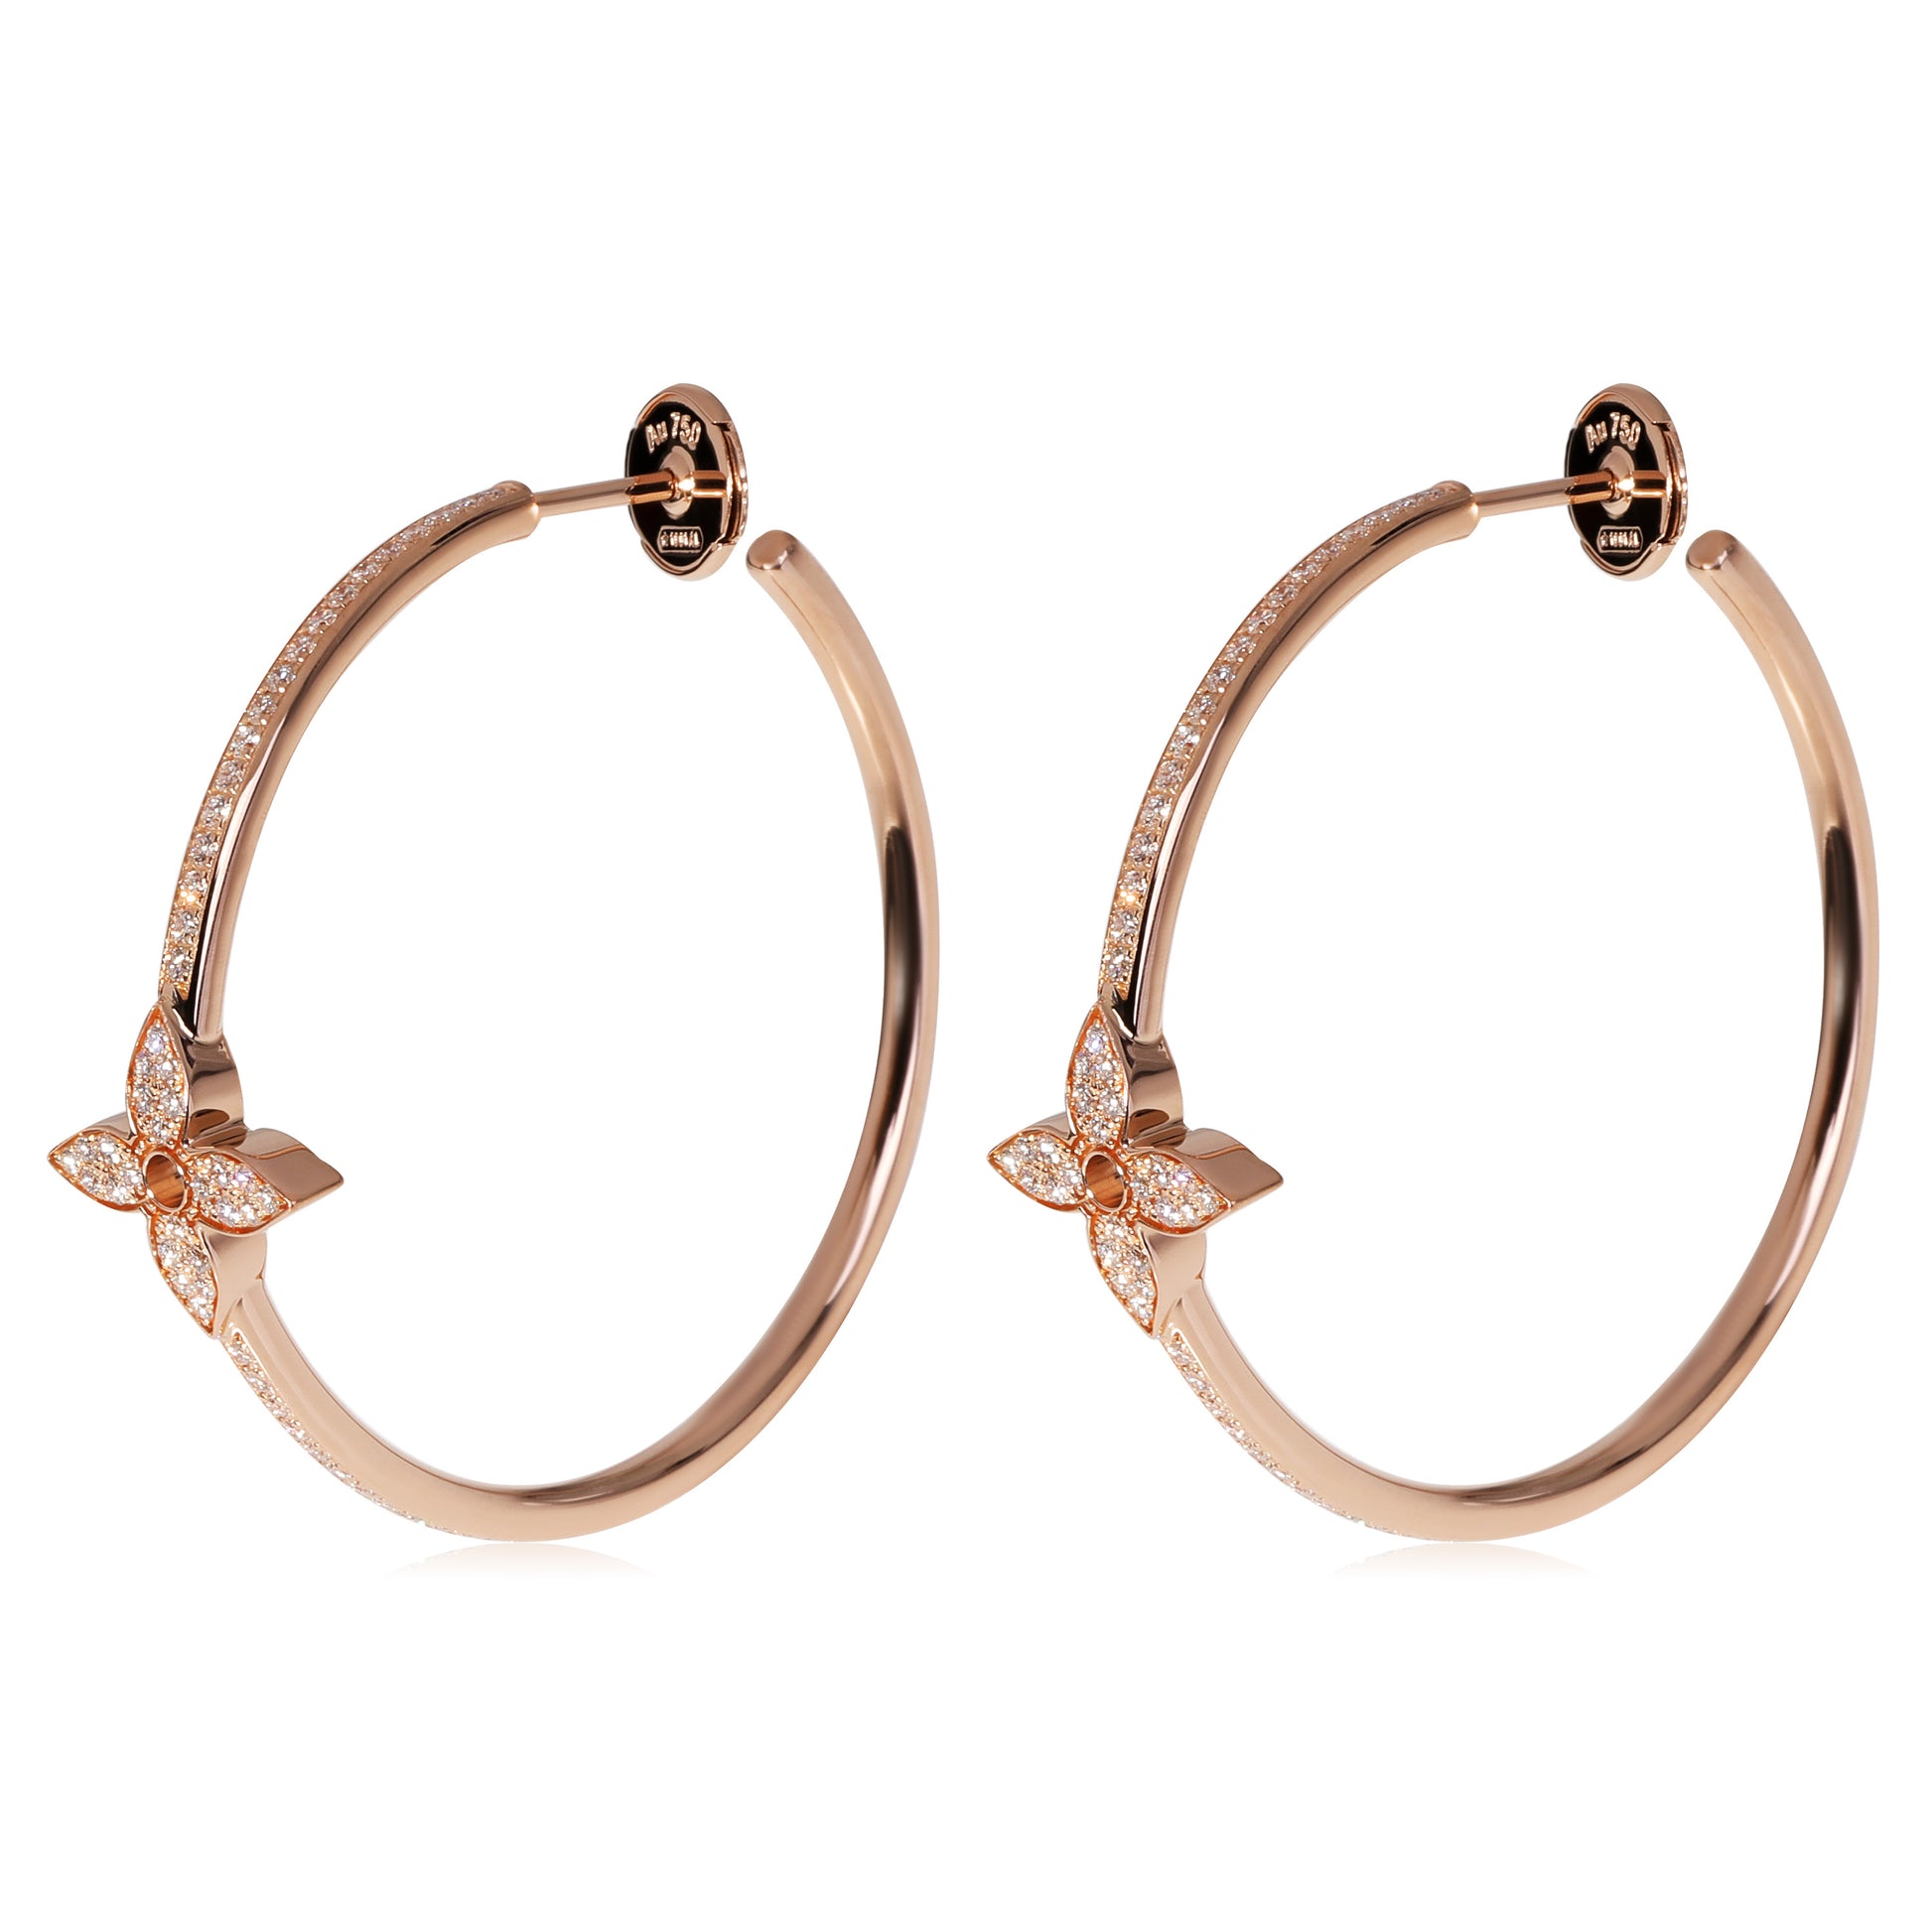 Idylle Blossom Small Hoop, Pink Gold And Diamond - Per Unit - Jewelry -  Categories